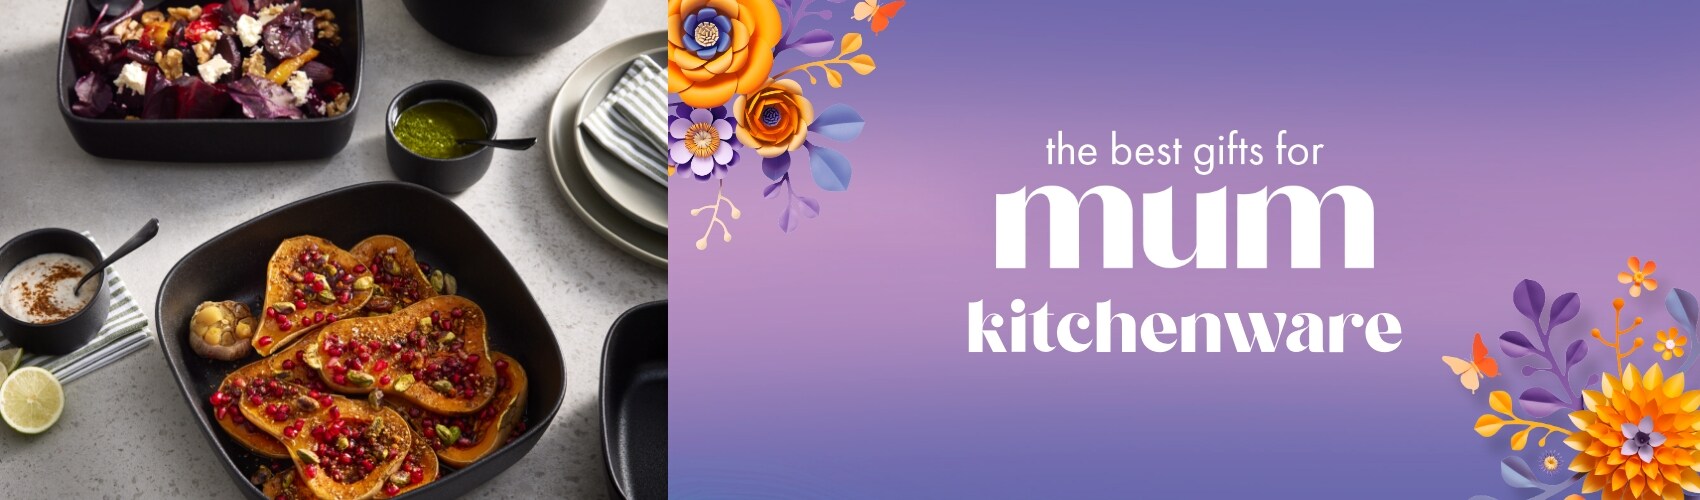 Mother's Day Kitchenware